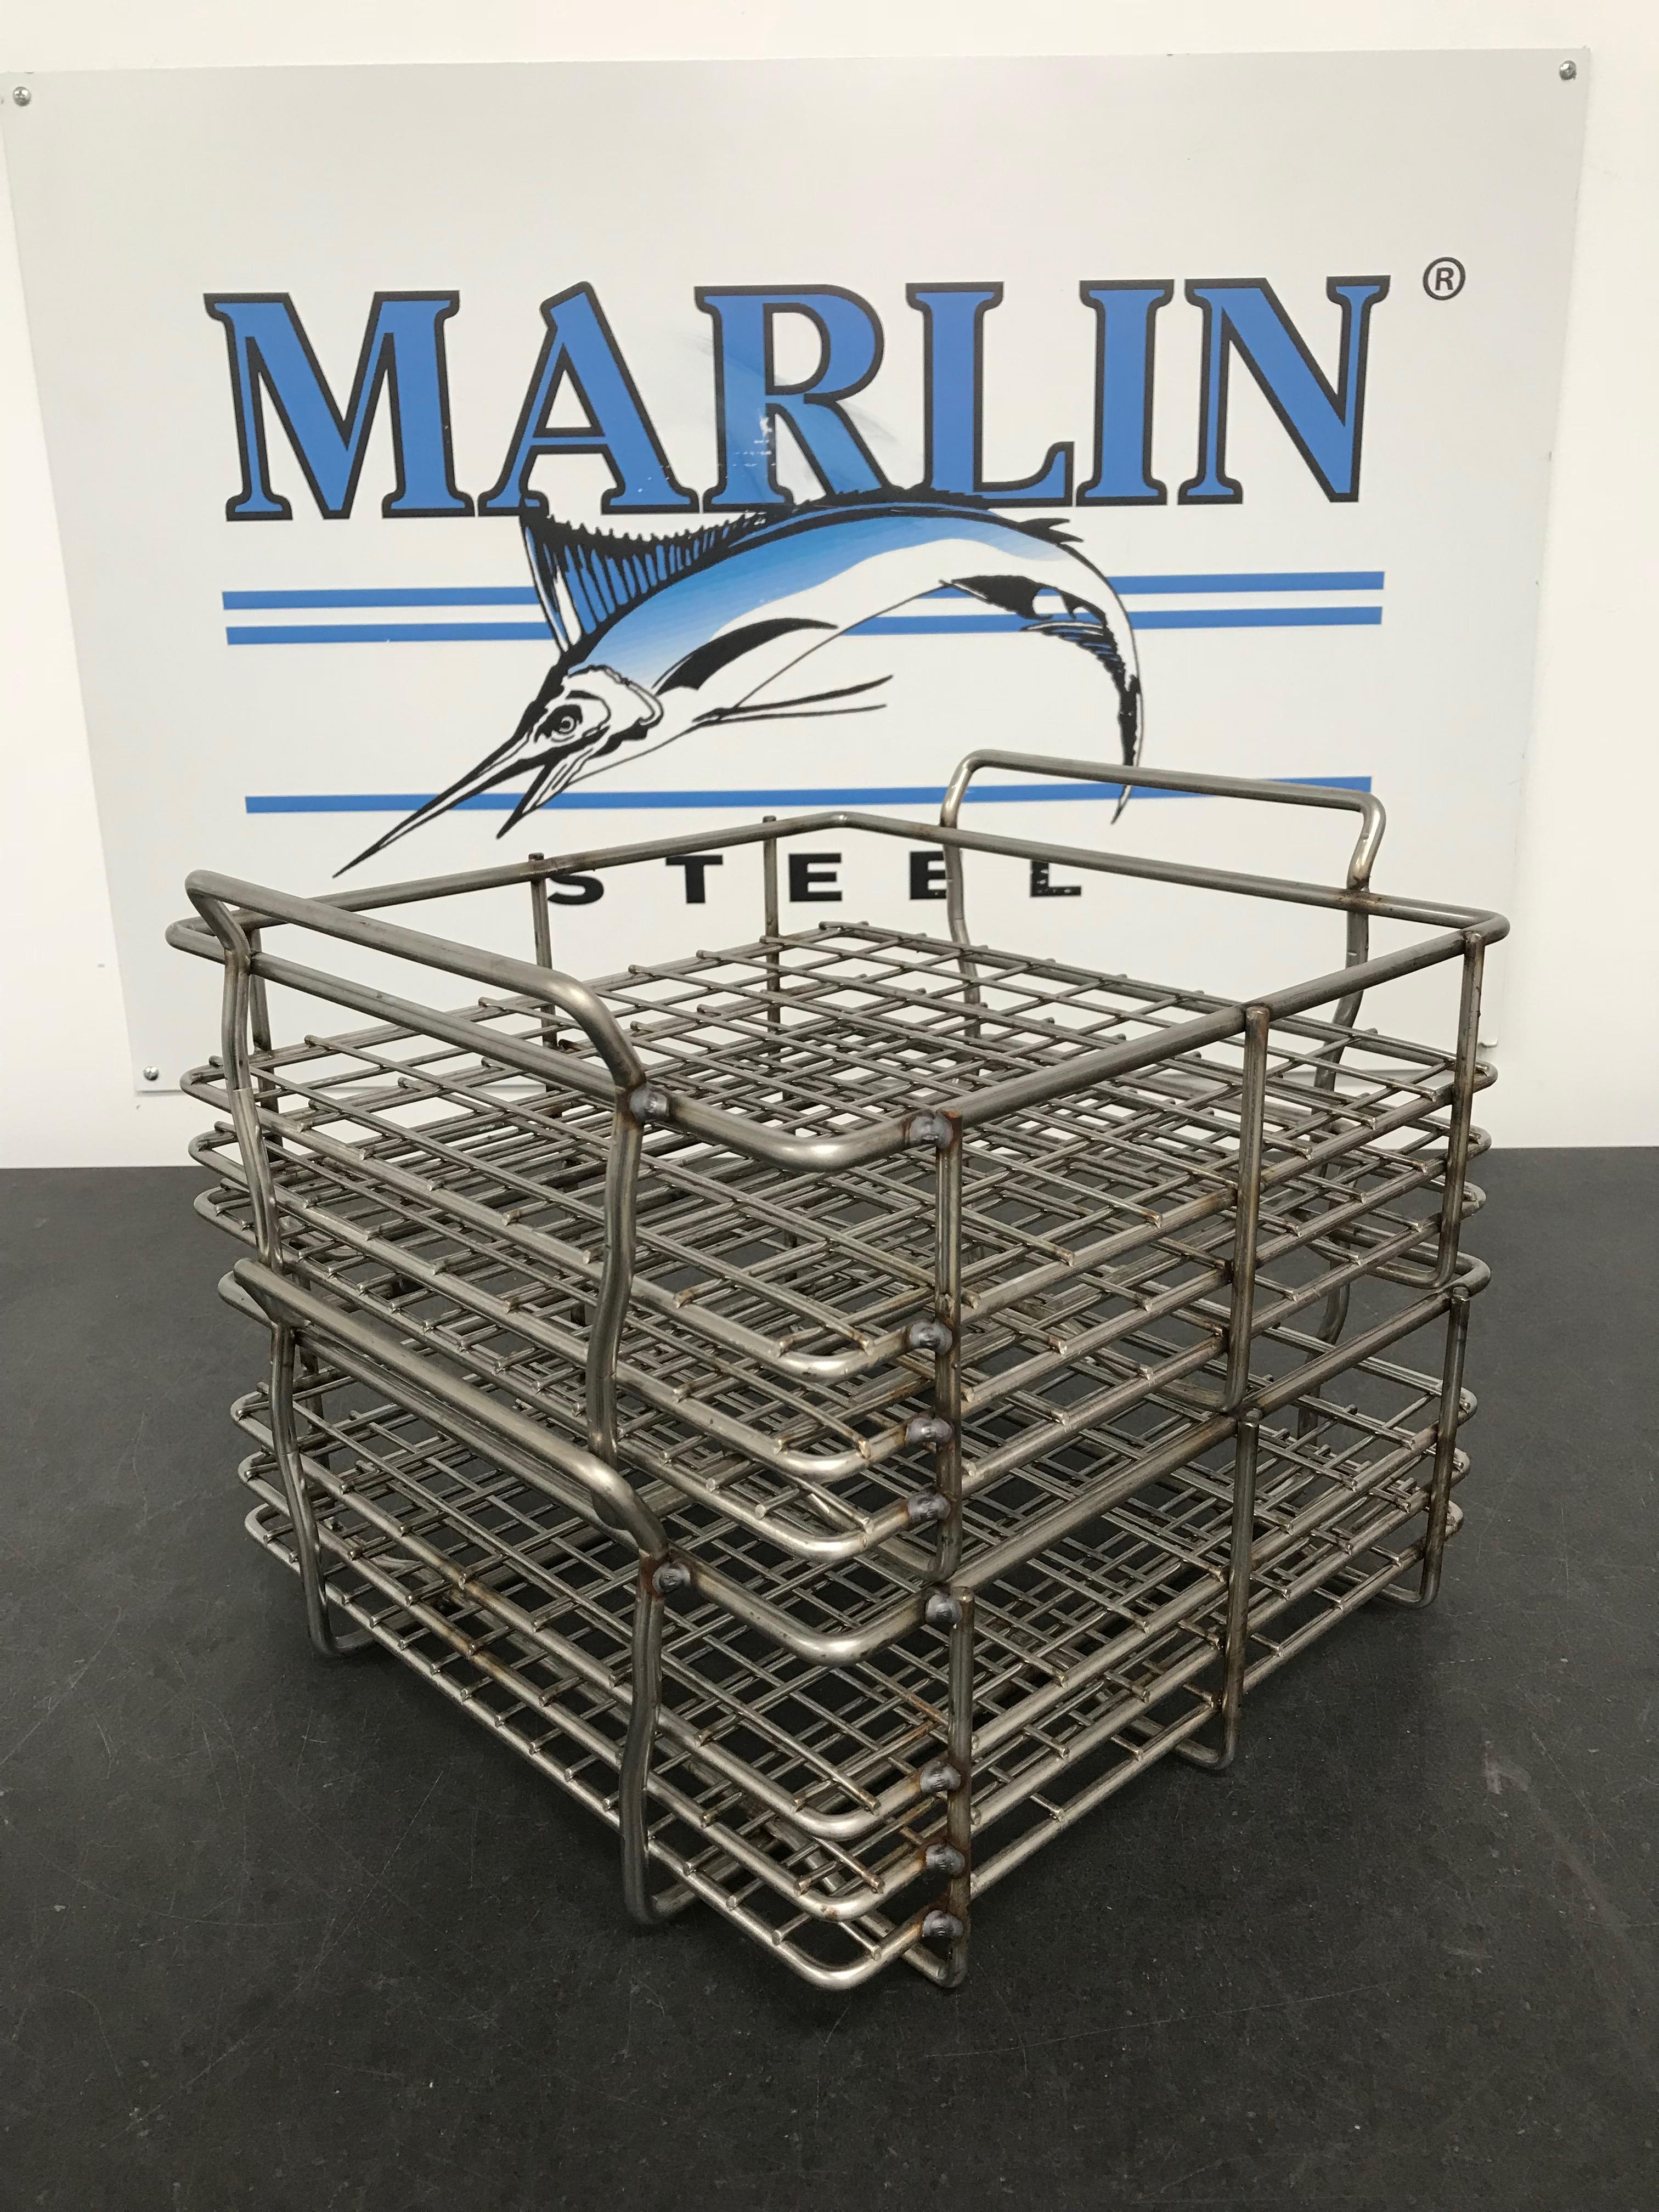 Marlin Steel Wire Racks for Ammunitions Applications